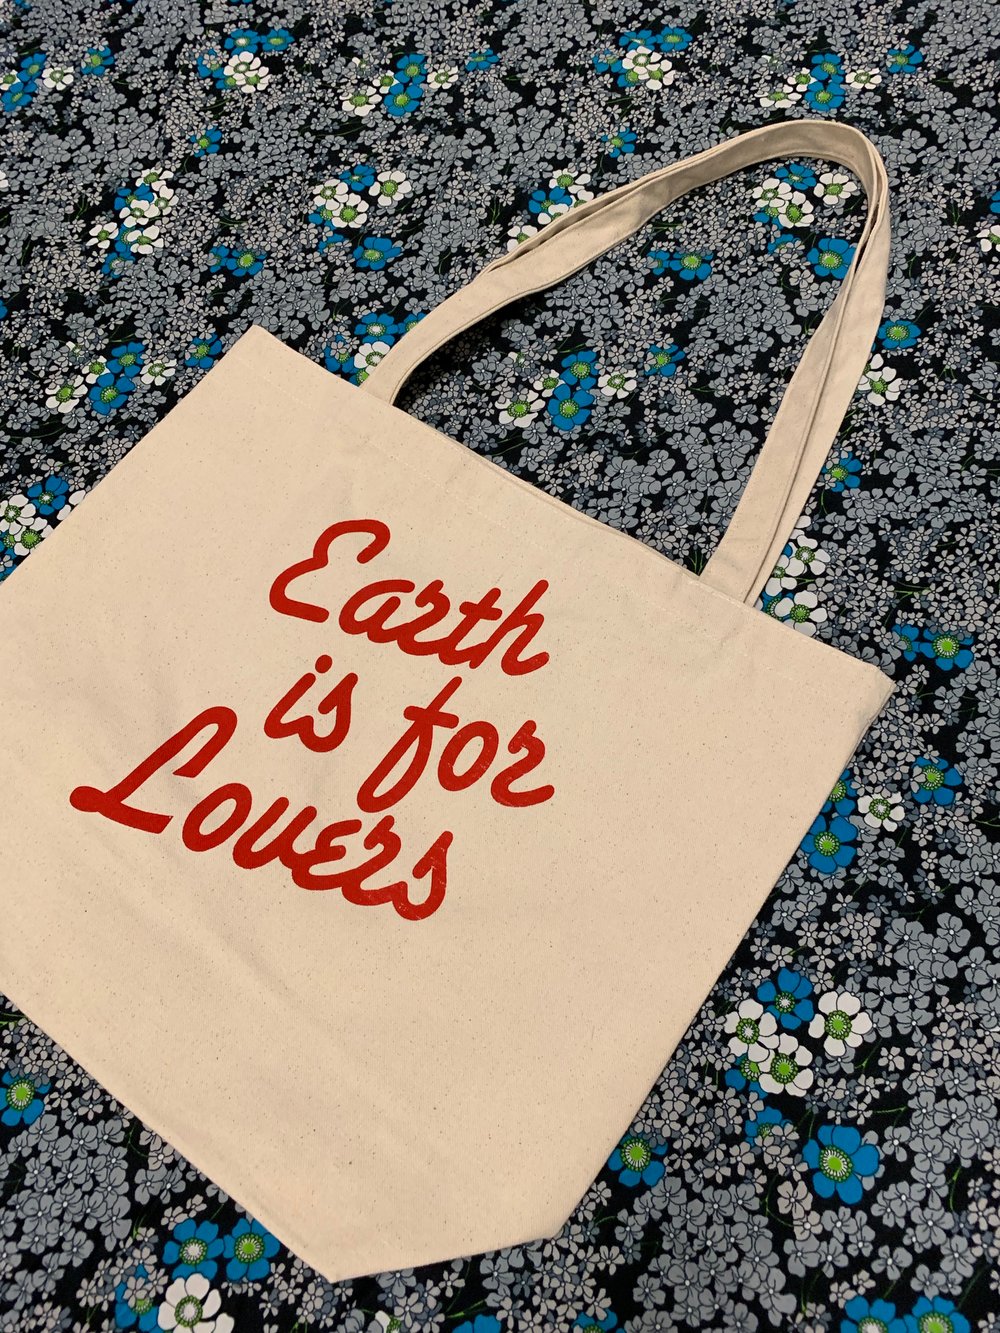 Earth is for Lovers Tote